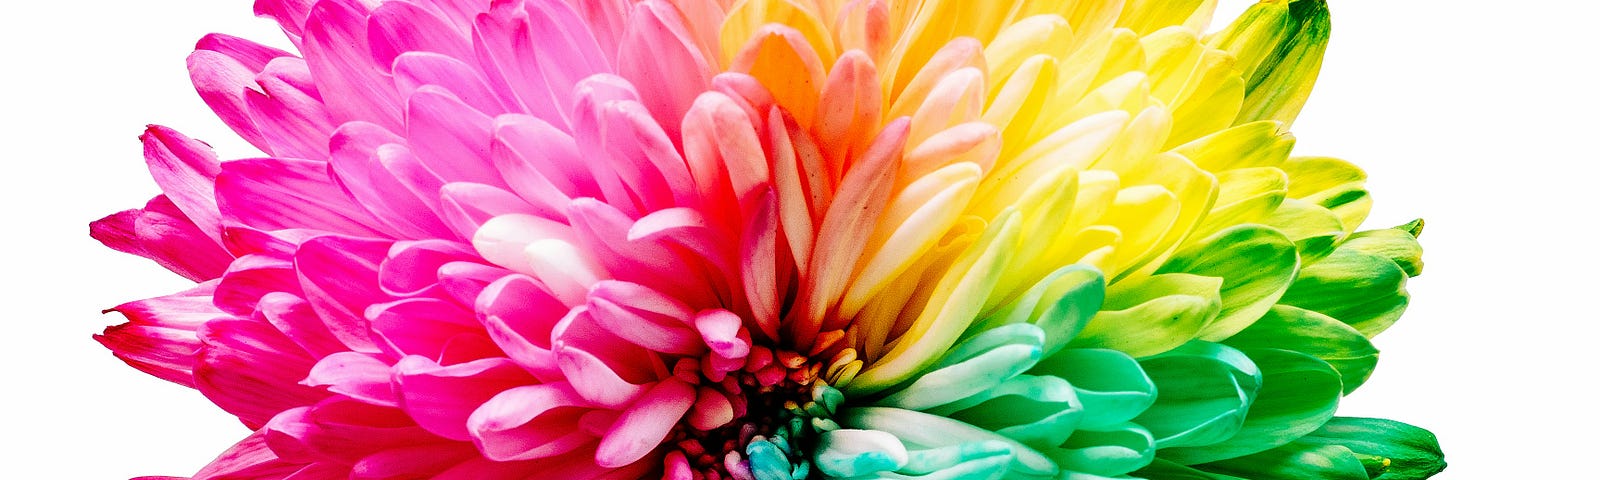 A rainbow colored flower on a white background.